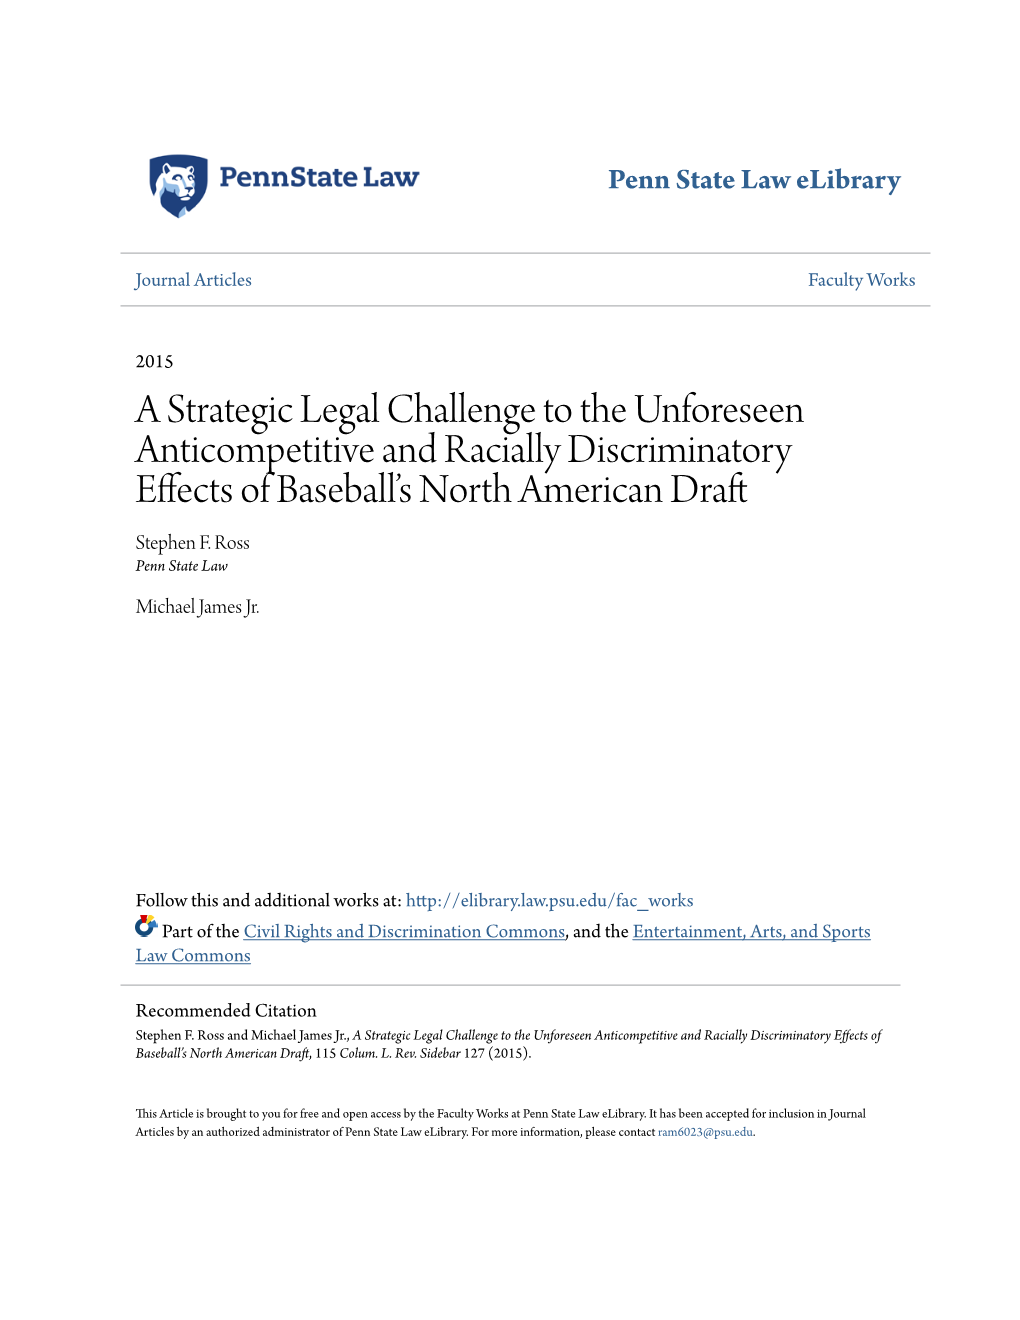 A Strategic Legal Challenge to the Unforeseen Anticompetitive and Racially Discriminatory Effects of Baseball's North American